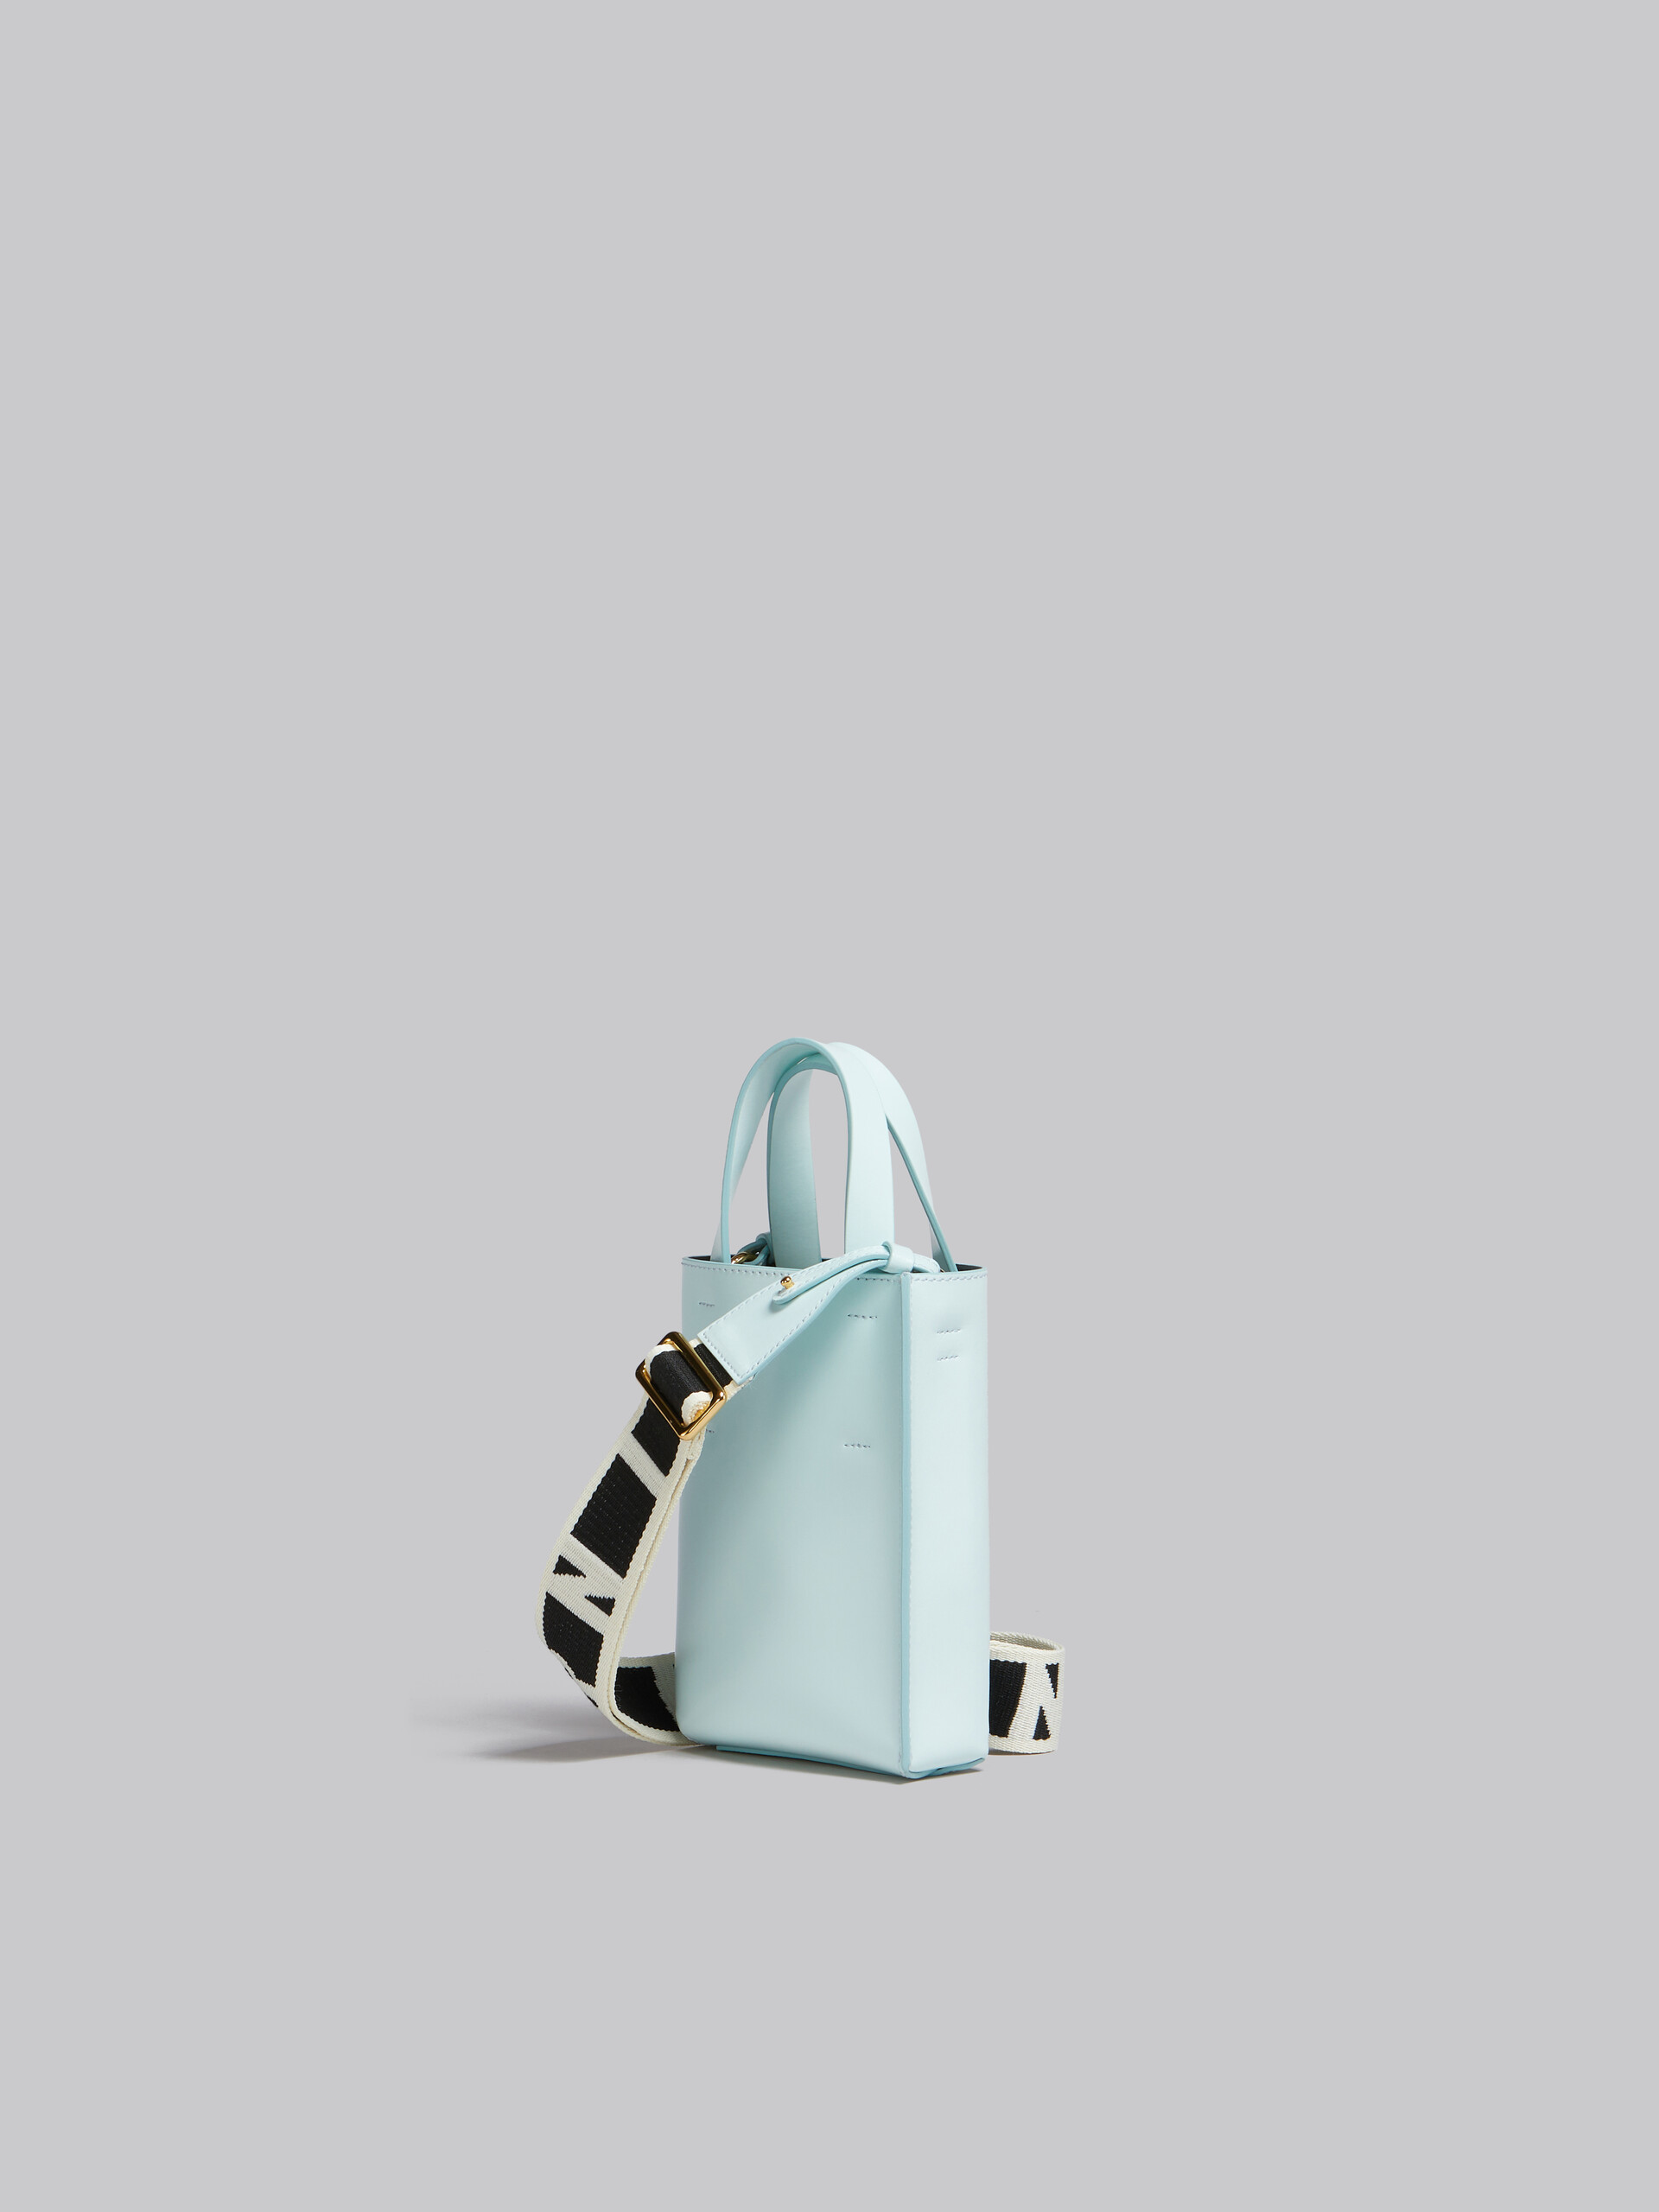 MUSEO nano bag in black leather - Shopping Bags - Image 3